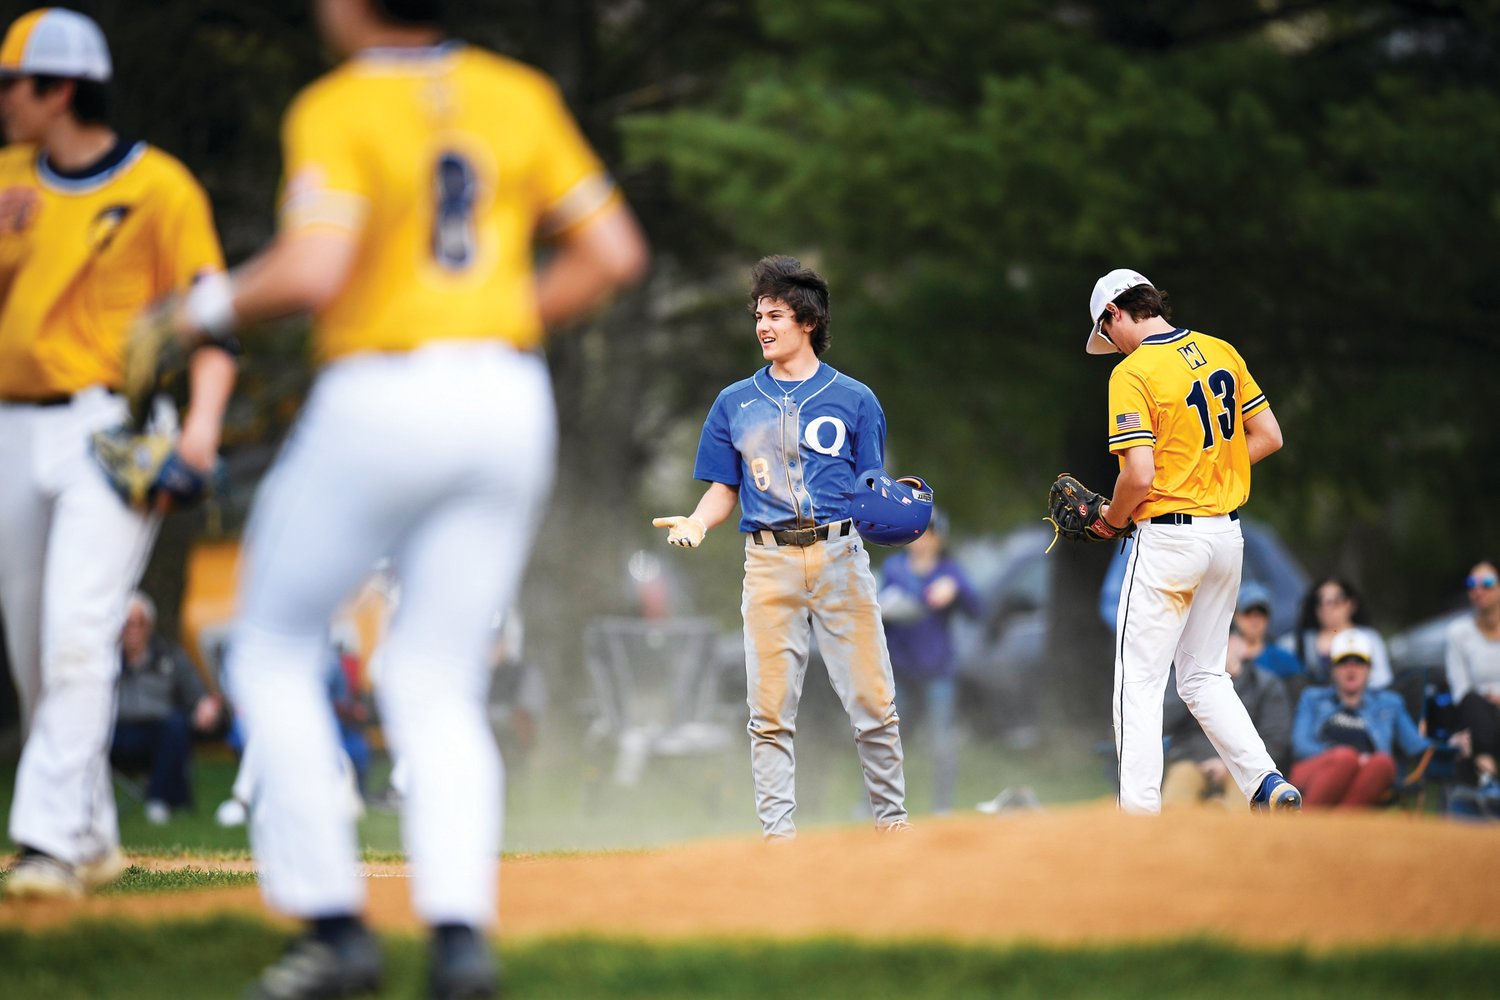 Quakertown’s Joey Pizzi questions the call after getting picked off by Wissahickon pitcher Adam Hajdak.